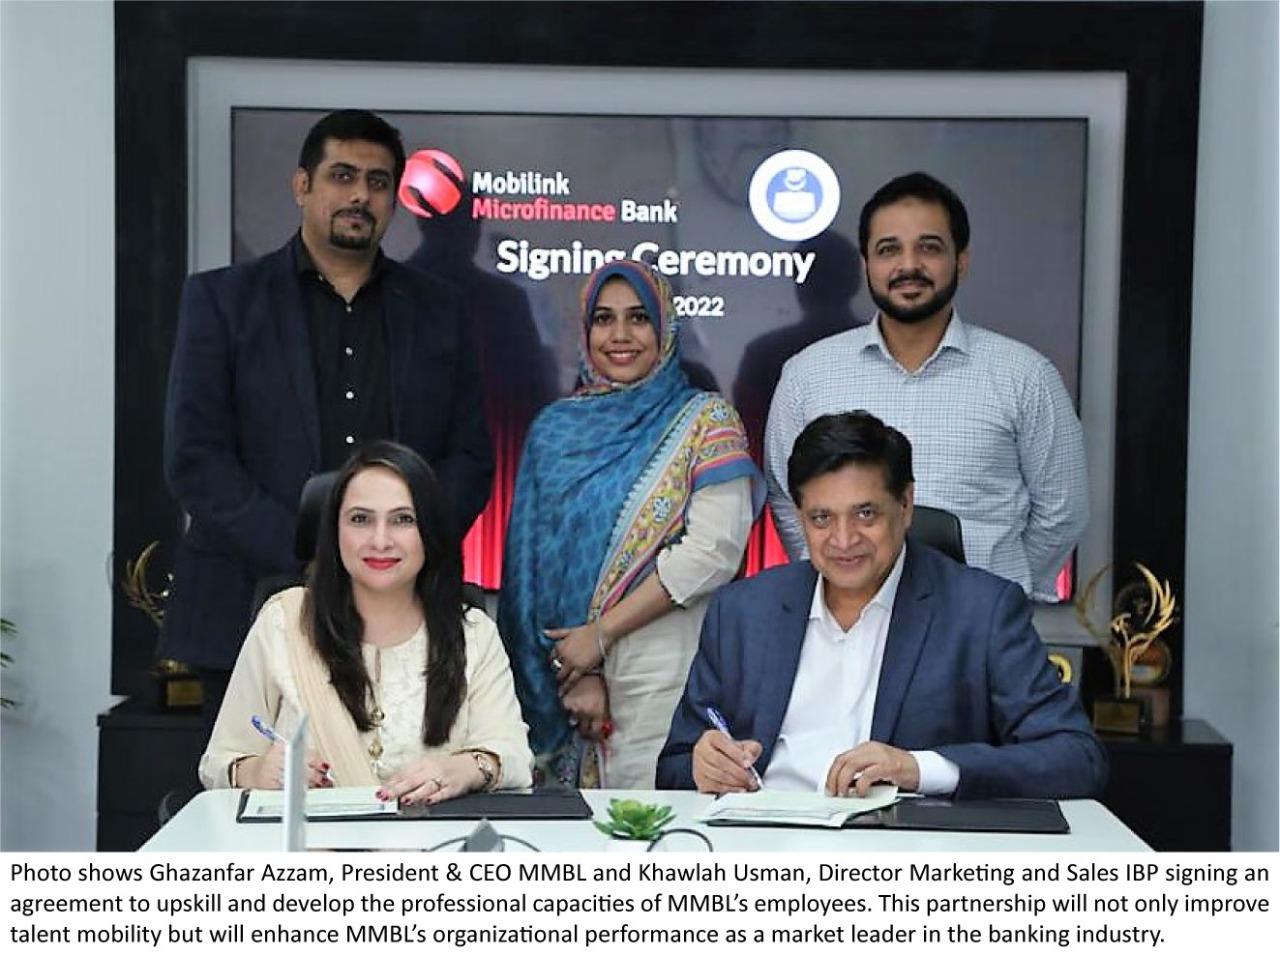 Mobilink Microfinance Bank signs an agreement with IBP toupskill its employees